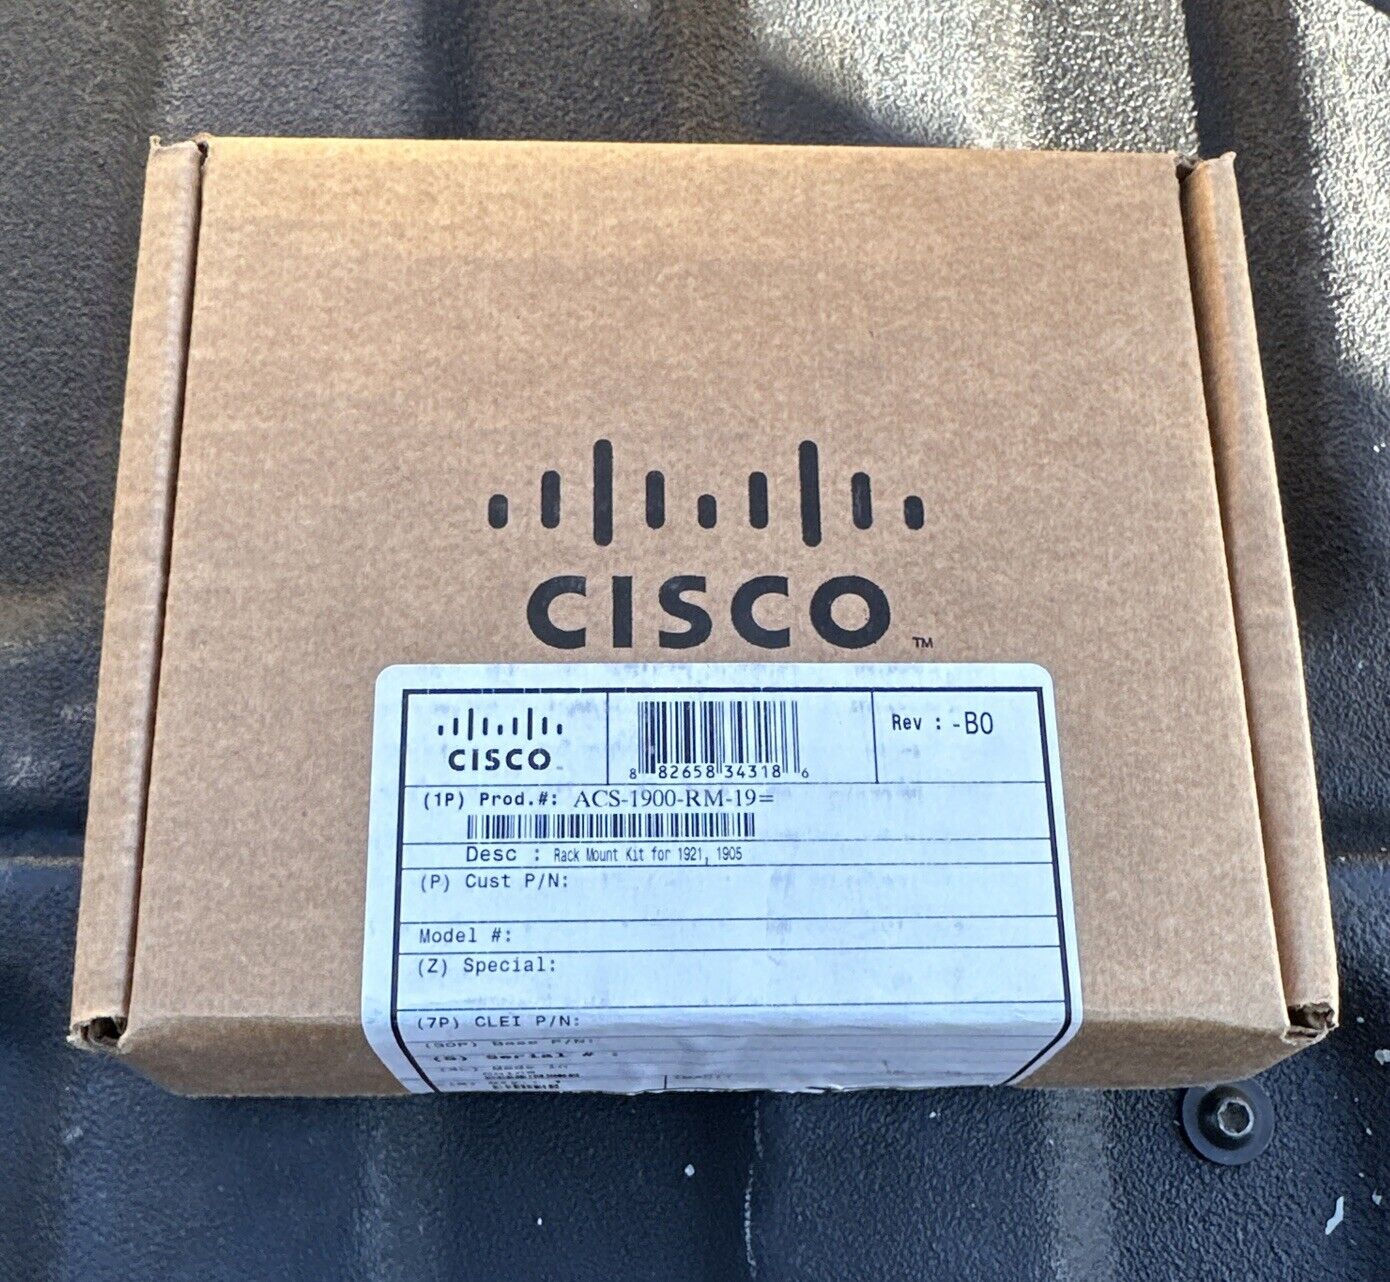 Original Cisco Systems ACS-1900-RM-19 Rack Mount Kit for 1921, 1905 New In Box